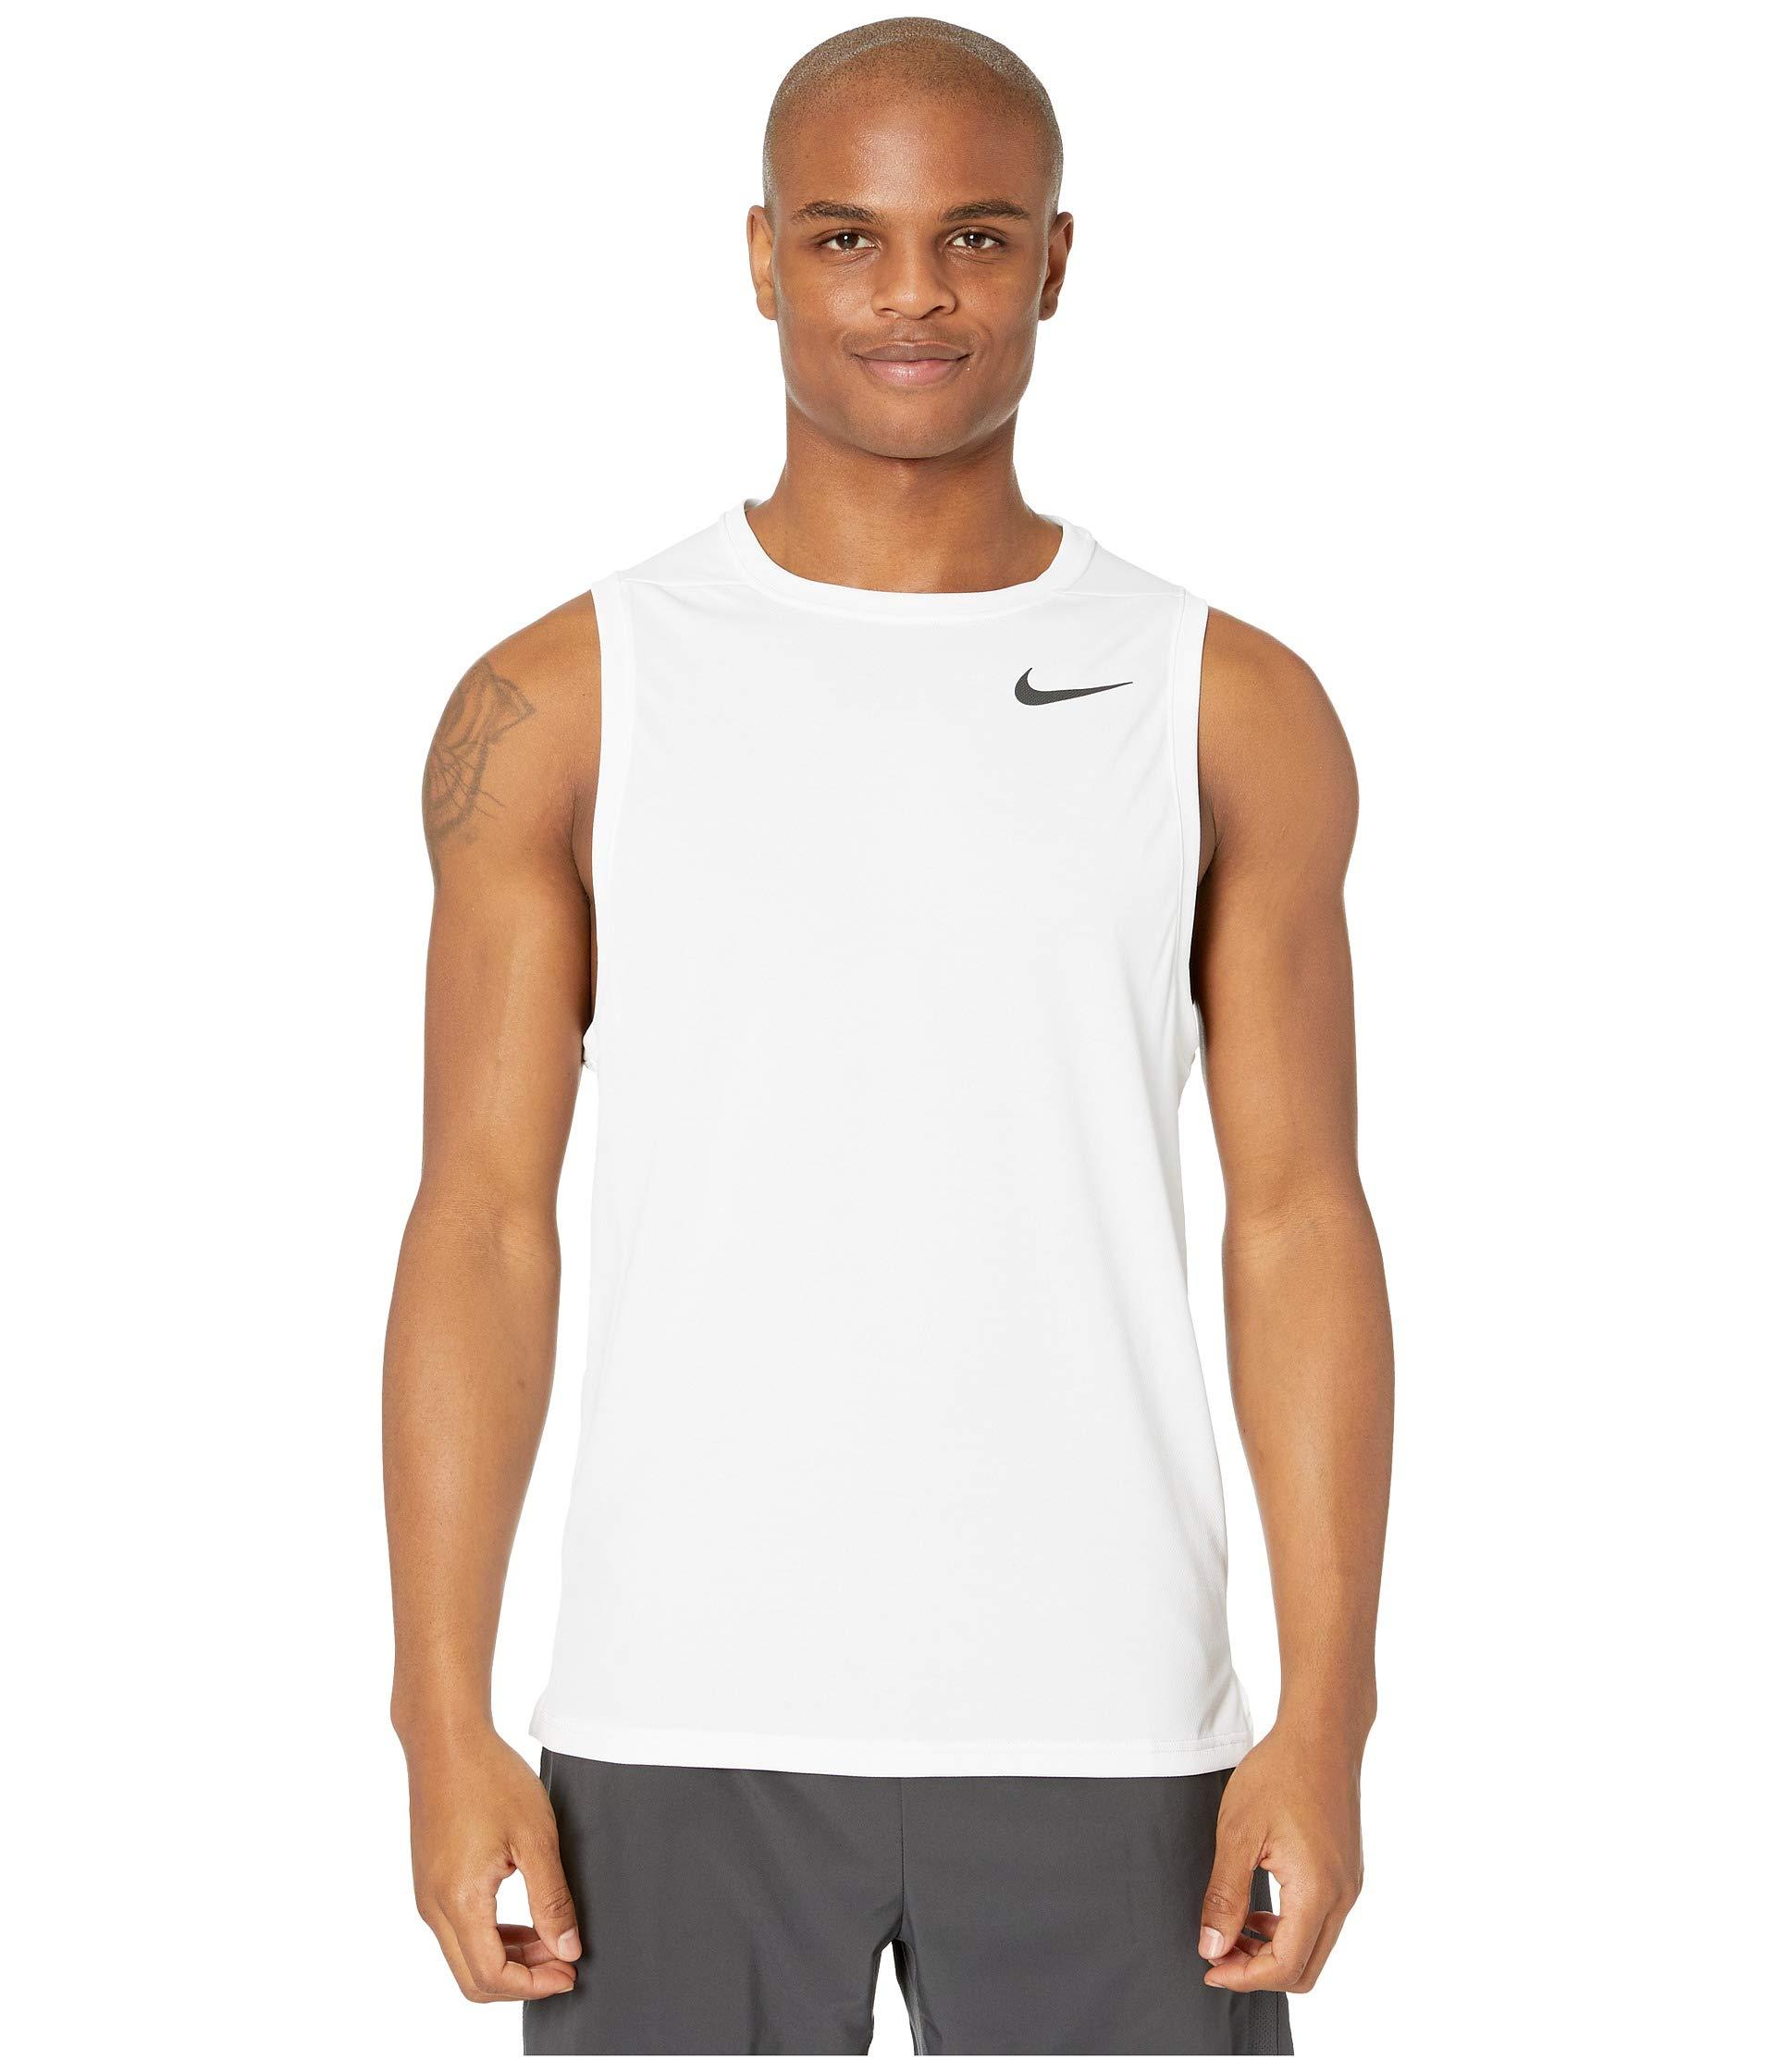 Nike Synthetic Superset Top Tank in 